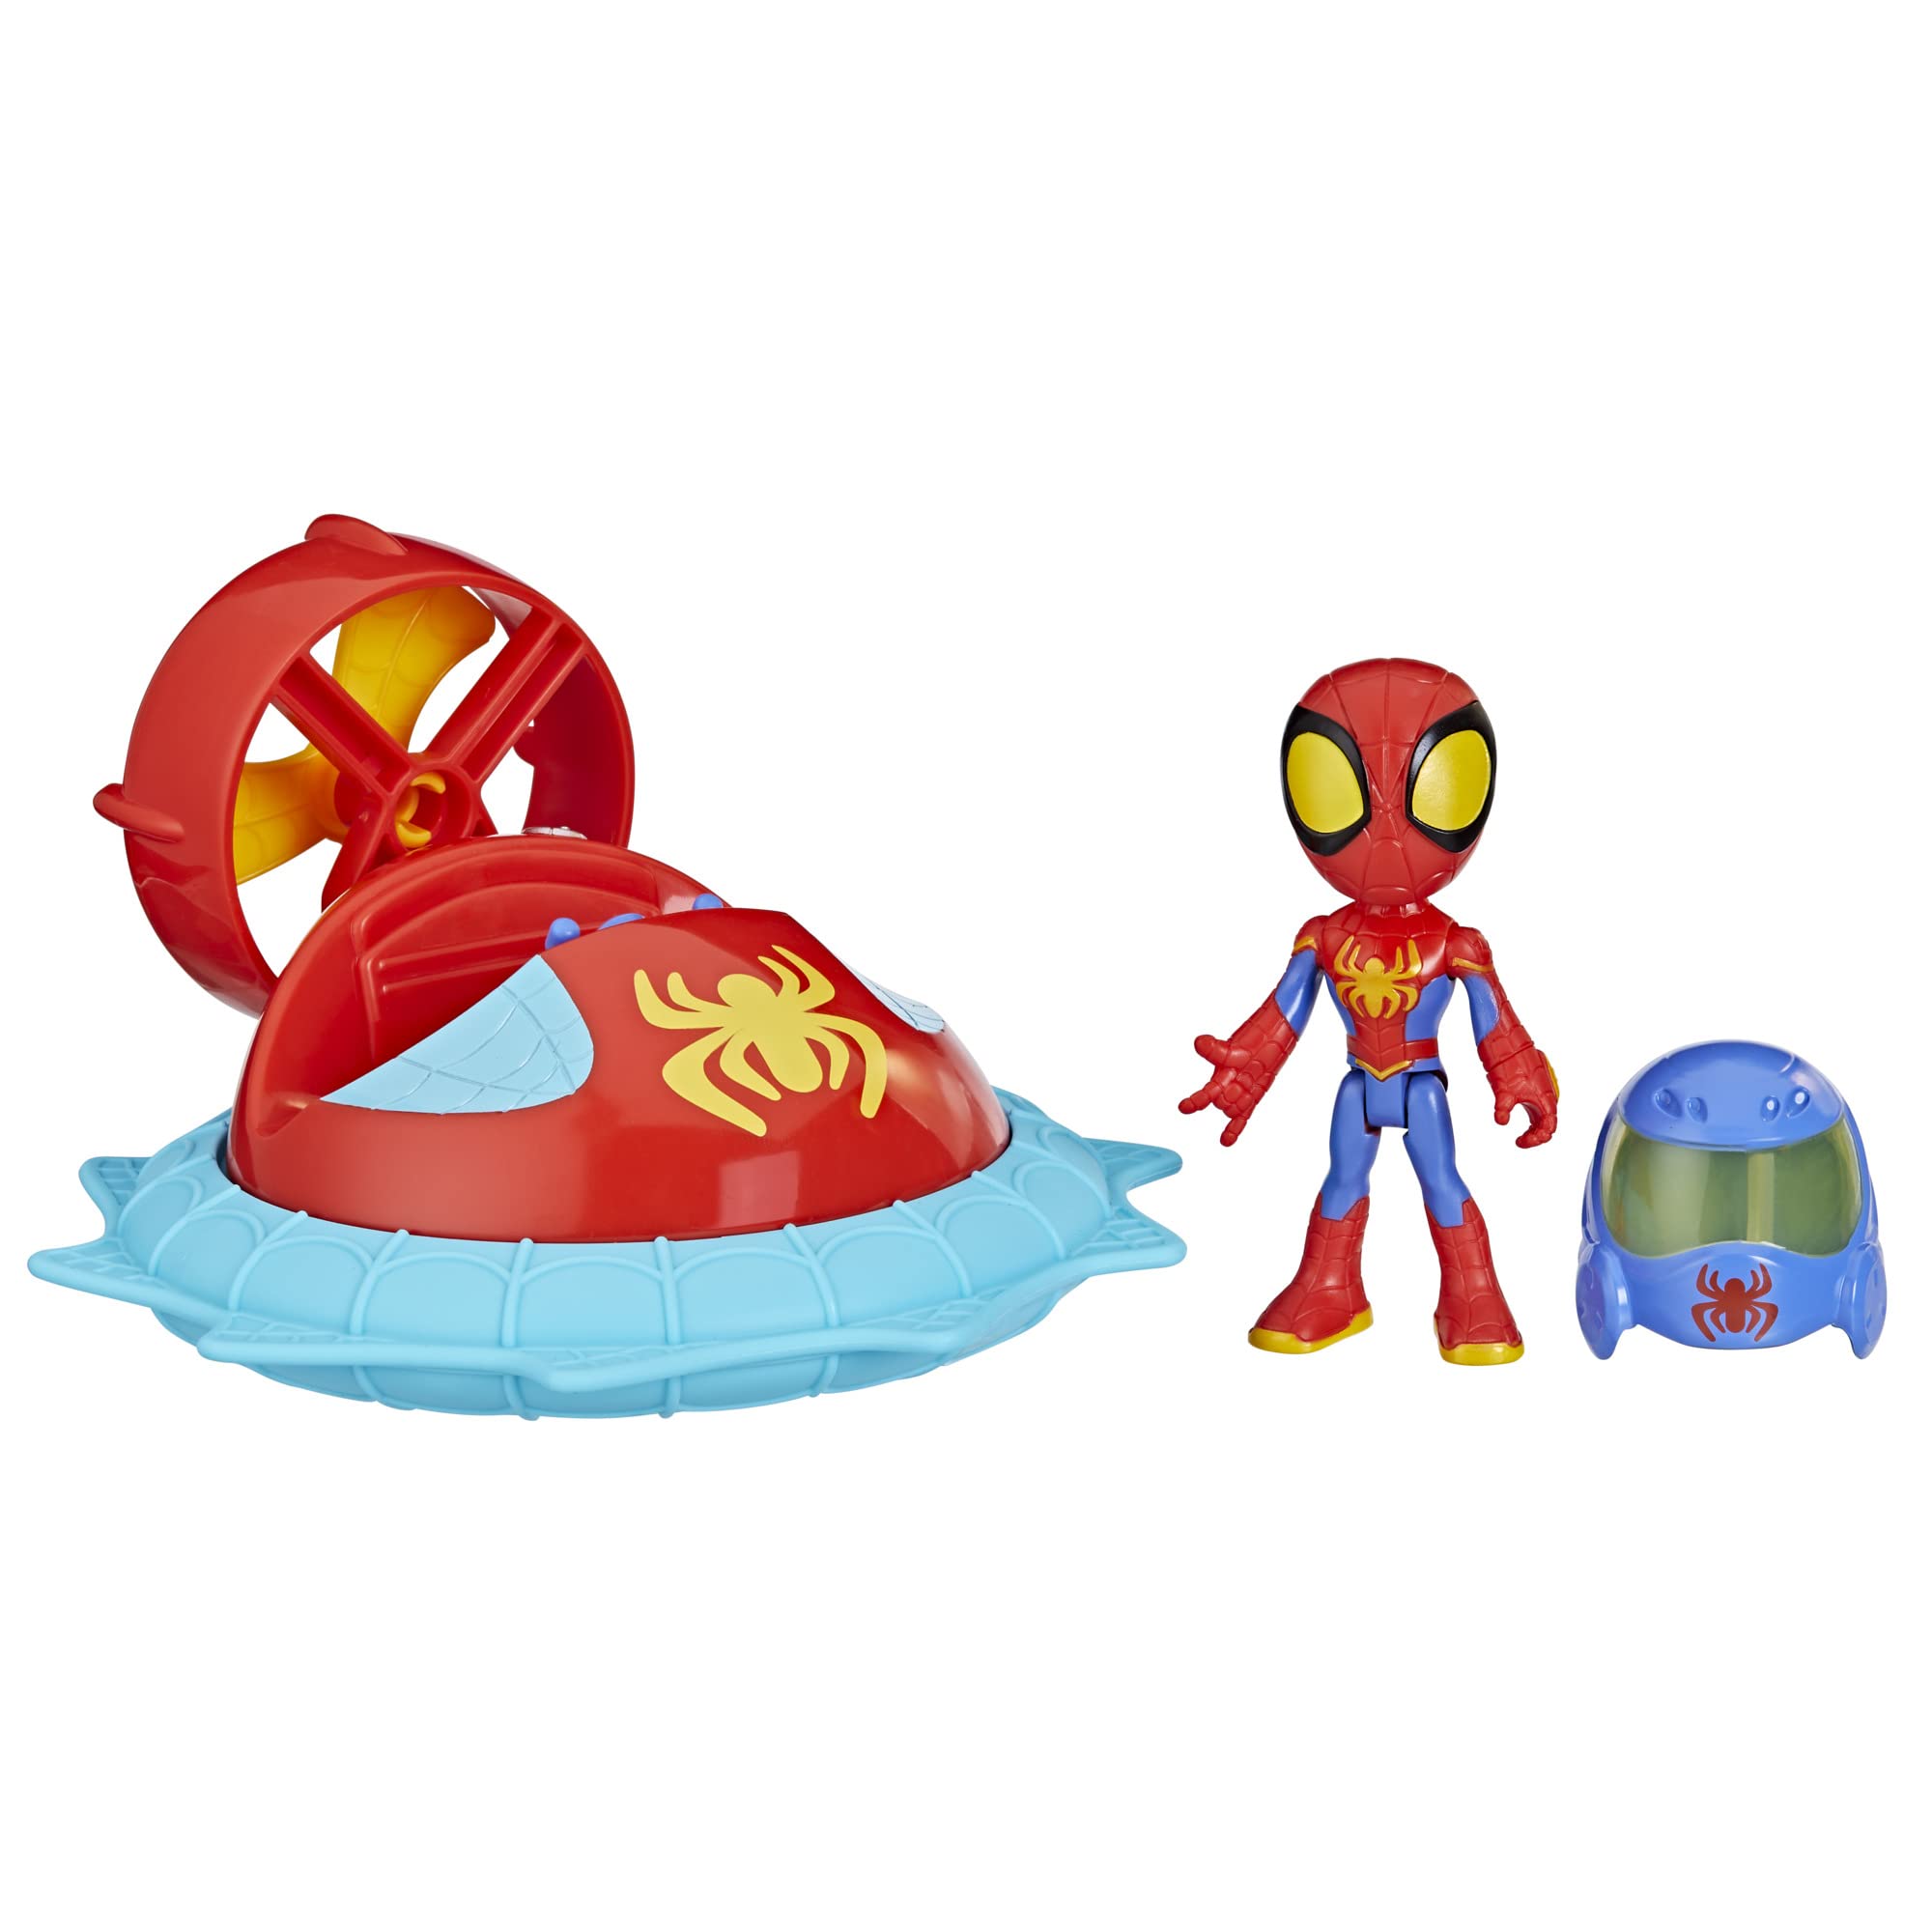 Spidey and His Amazing Friends Hasbro Marvel Web-Spinners Spidey with Hover Spinner,Car Playset with Vehicle,Figure,and Accessory,Toy Cars for Kids 3 and Up